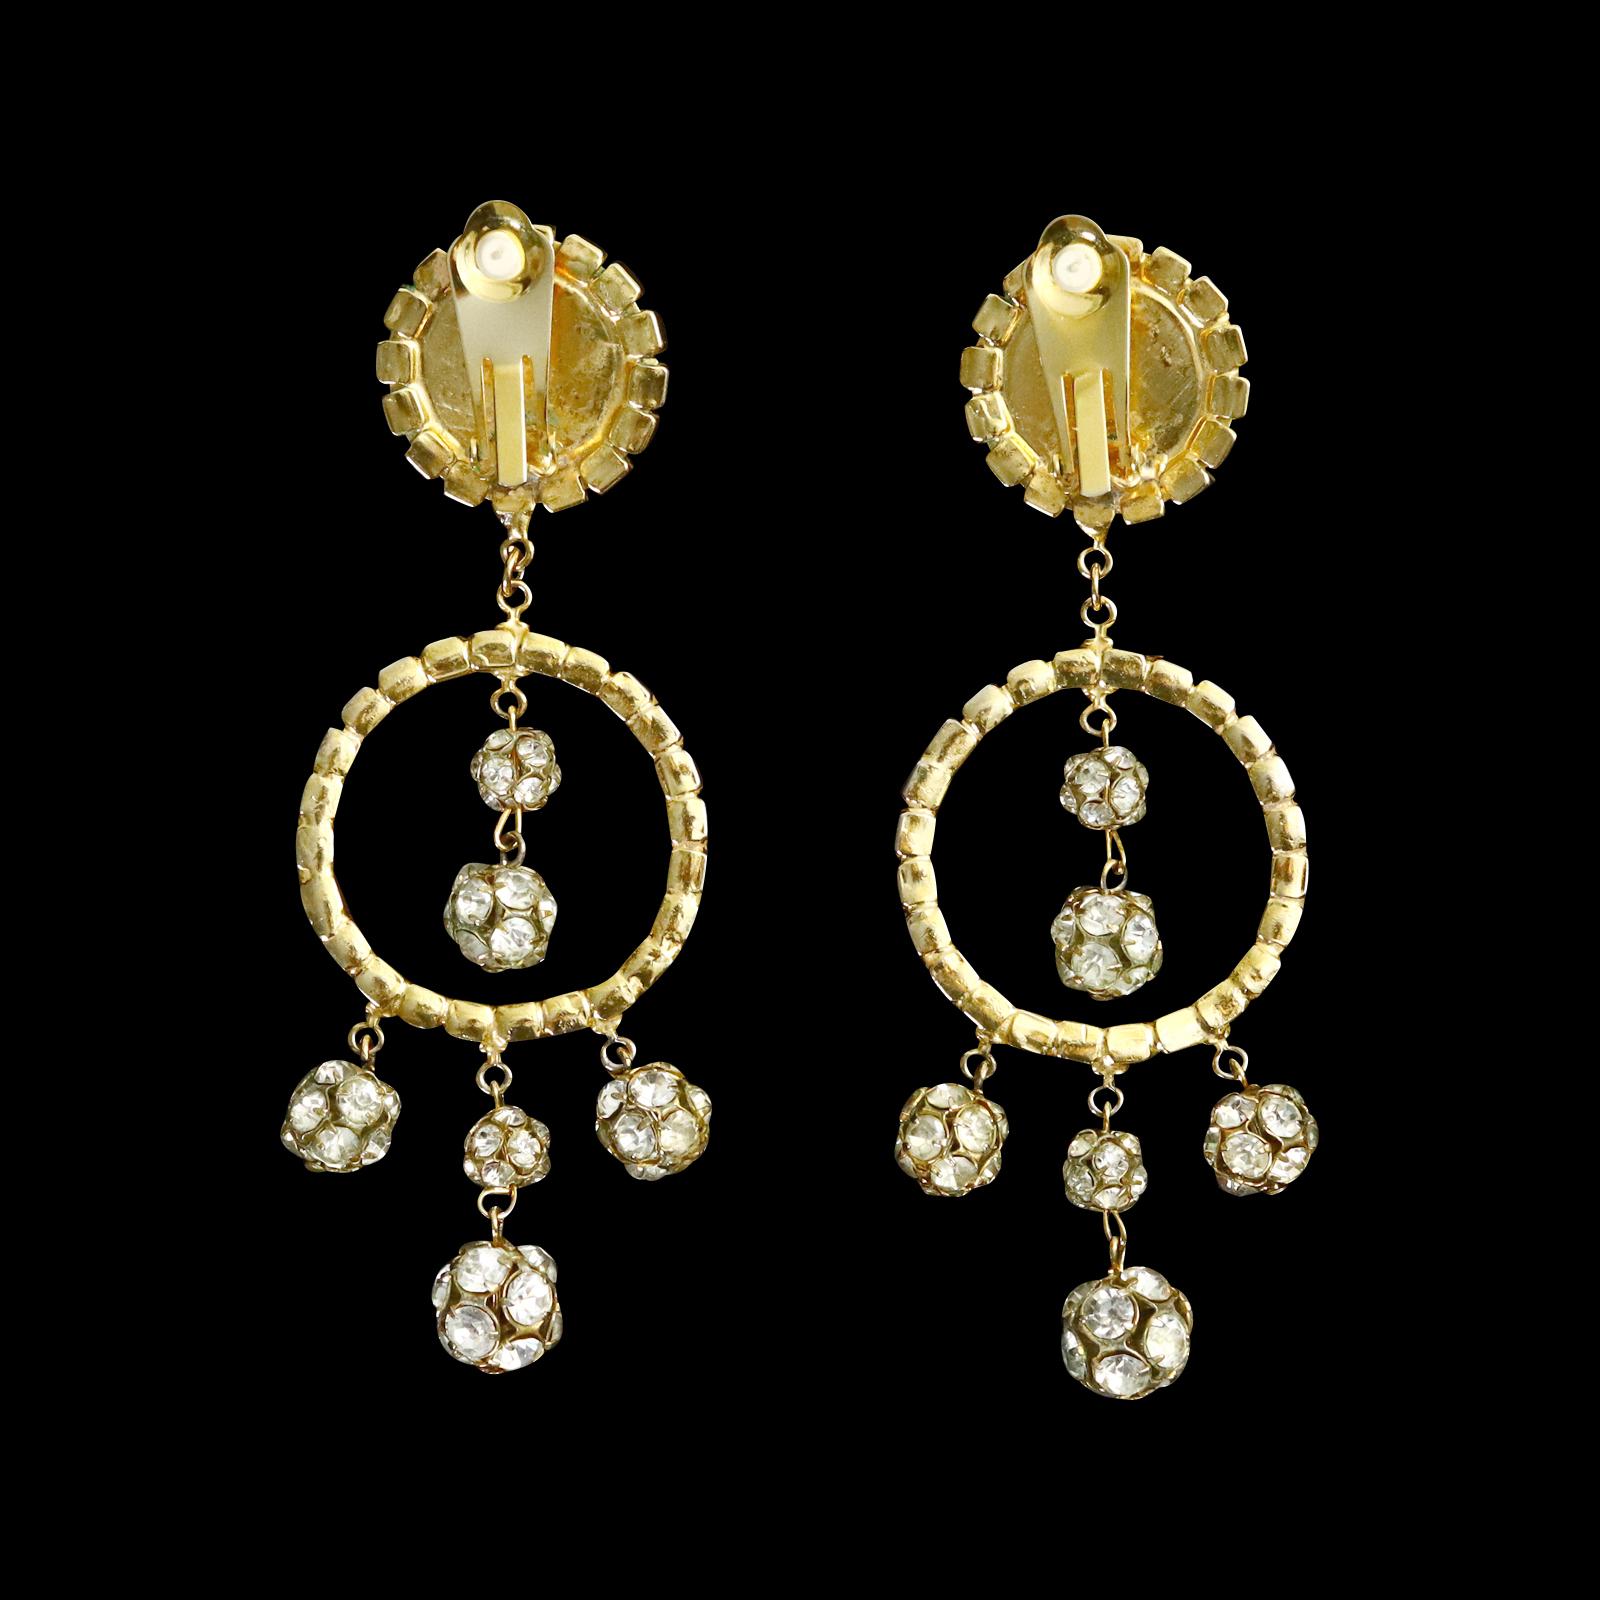 Vintage Gold Tone Diamante Long Dangling Earrings with Rondelles, Circa 1960s For Sale 5